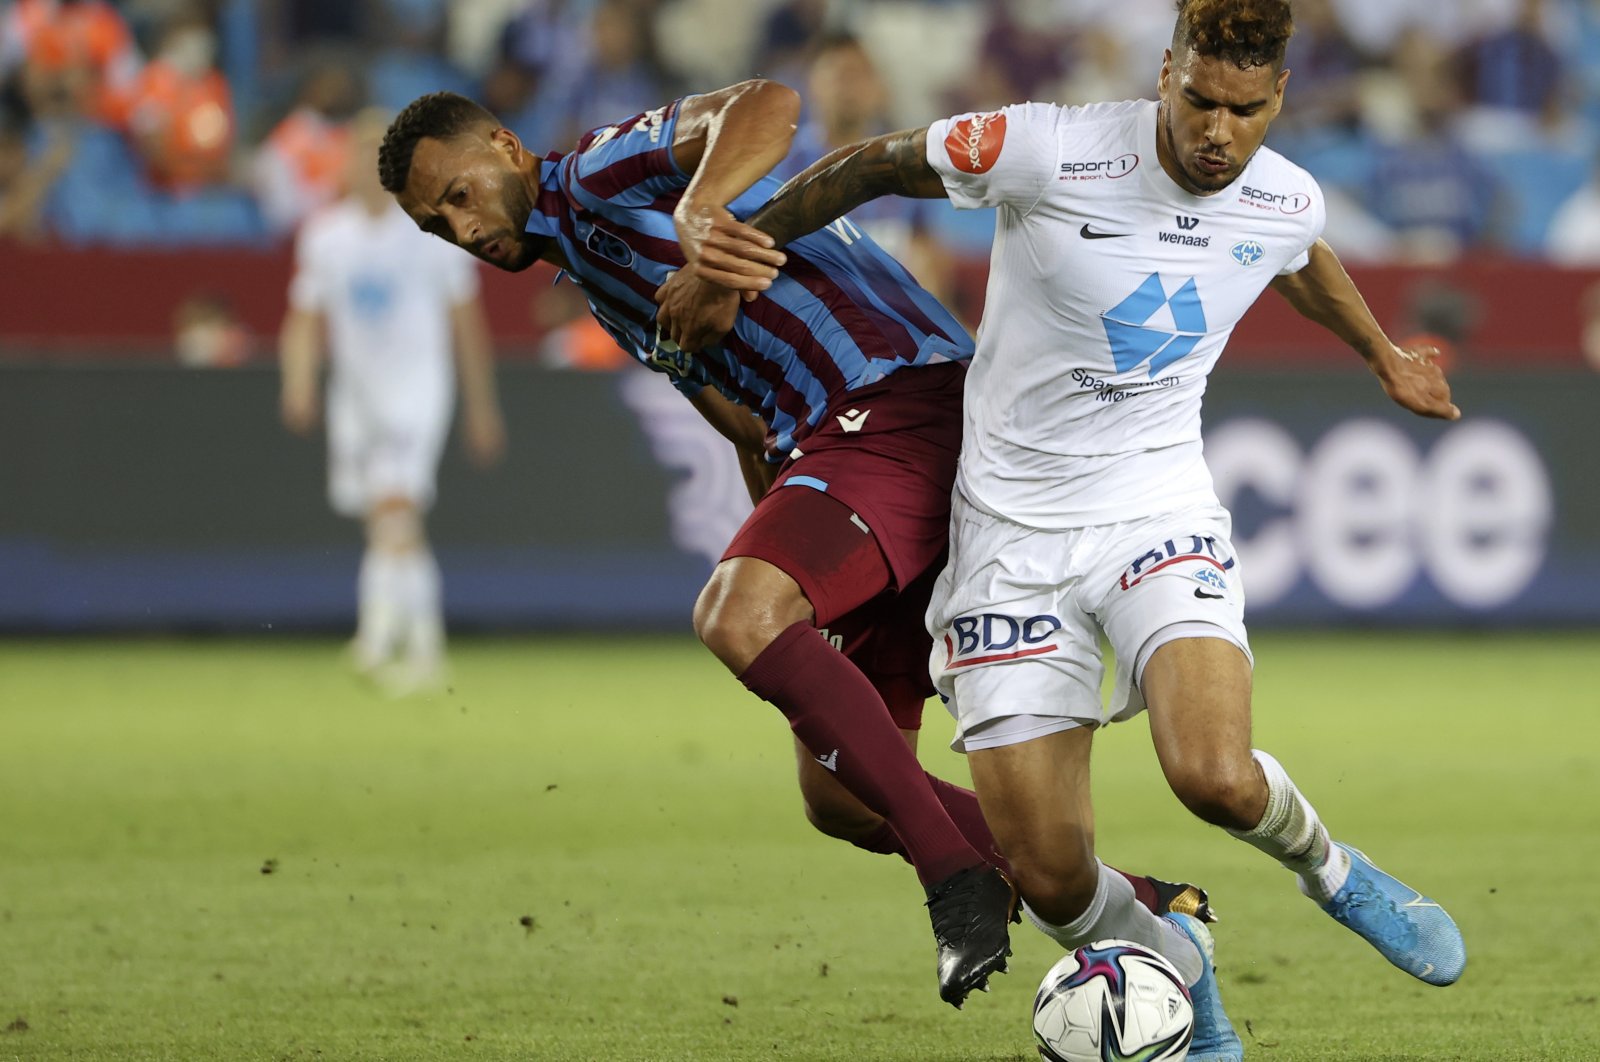 Molde's Ohi Omoijuanfo (R) duels for the ball with Trabzonspor's Vitor Hugo during the Europa Conference League qualifying match at Yeni Stadium, Trabzon, Turkey, Aug. 5, 2021. (AP Photo)